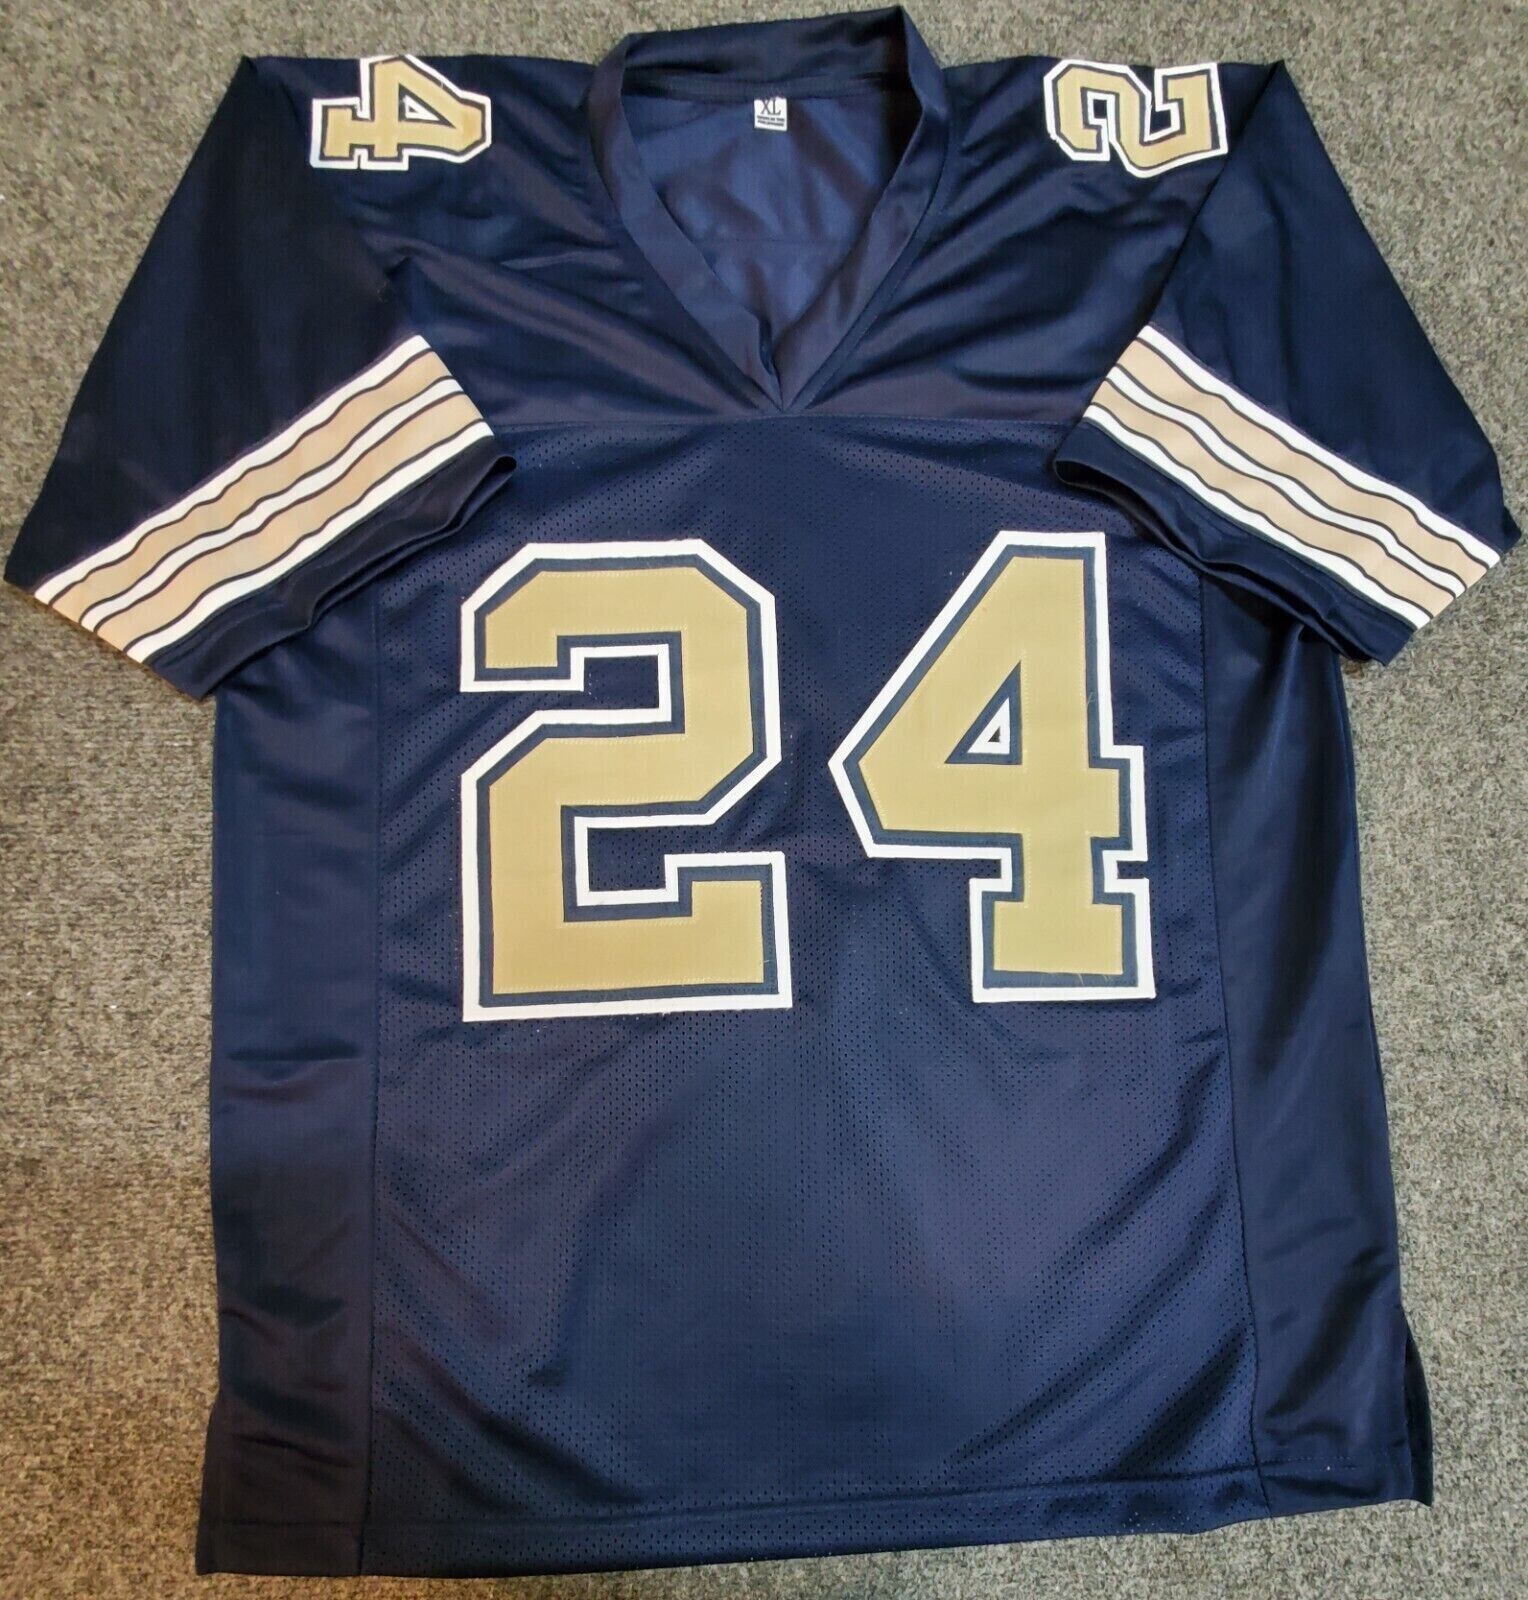 Unbranded Phil Campbell Iii Unsigned Pitt Panthers Style Custom Jersey 22.50 sports jersey framing , jersey framing